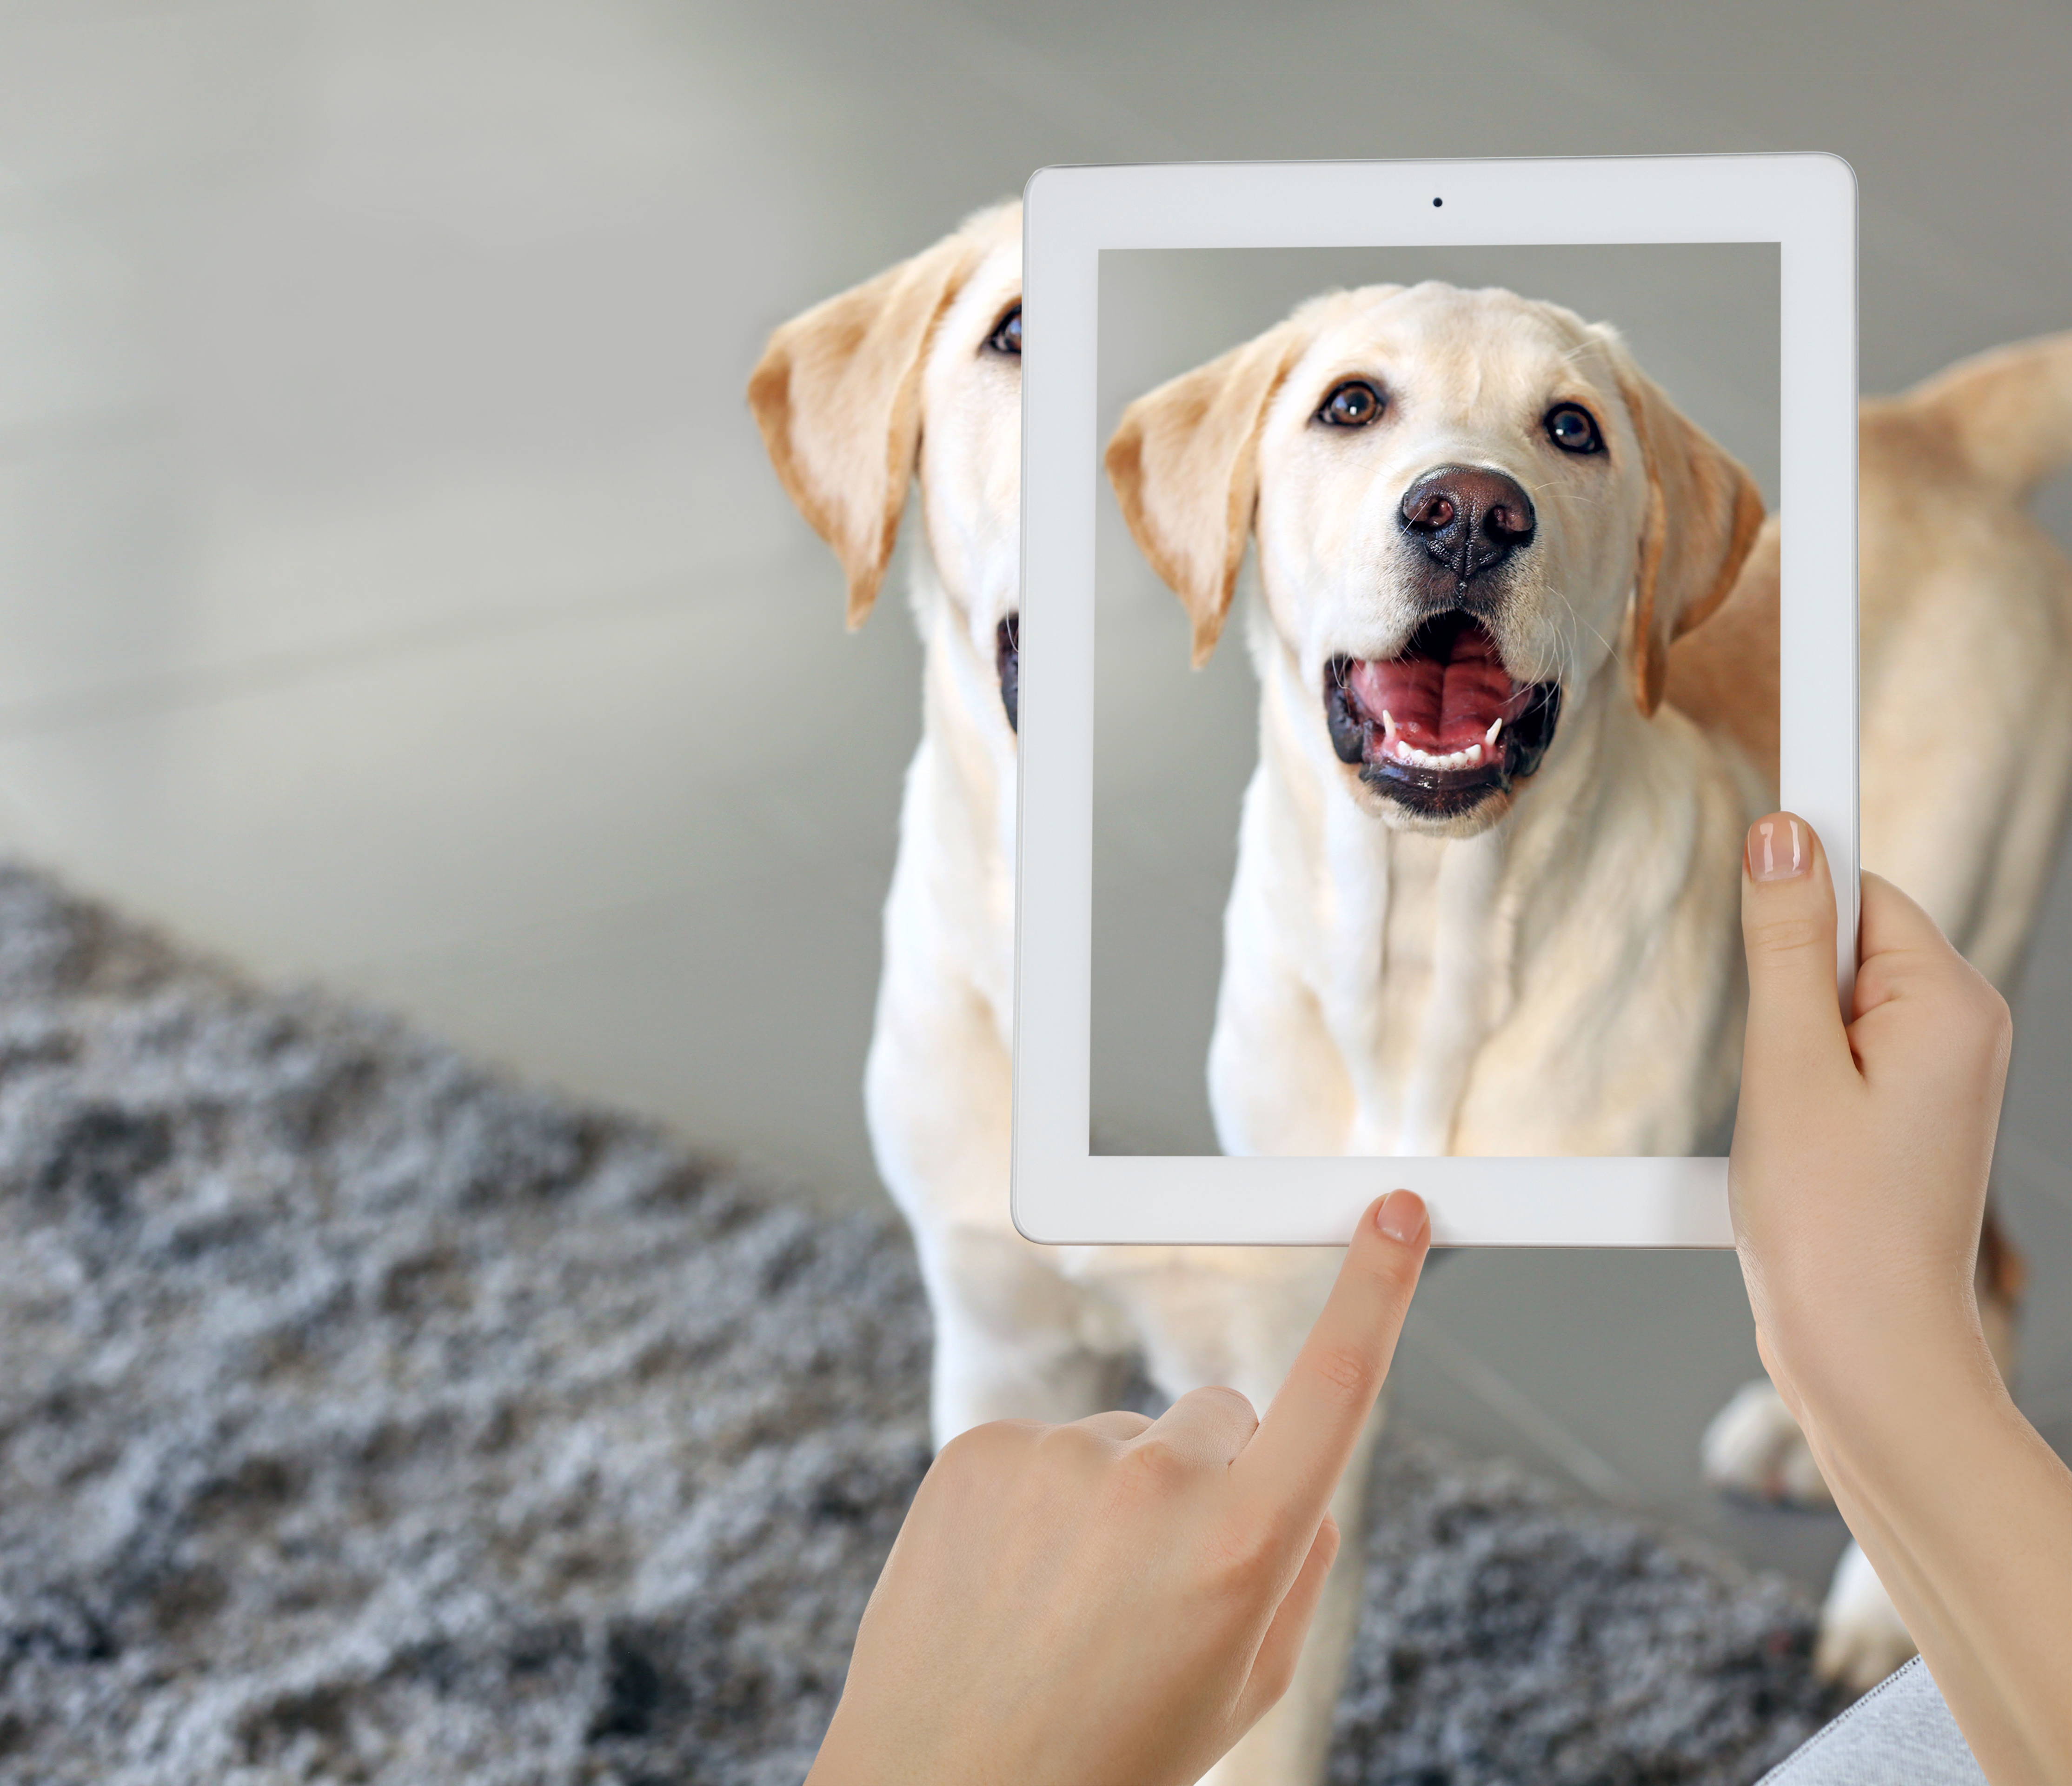 Capturing Great Photos of Your Dog